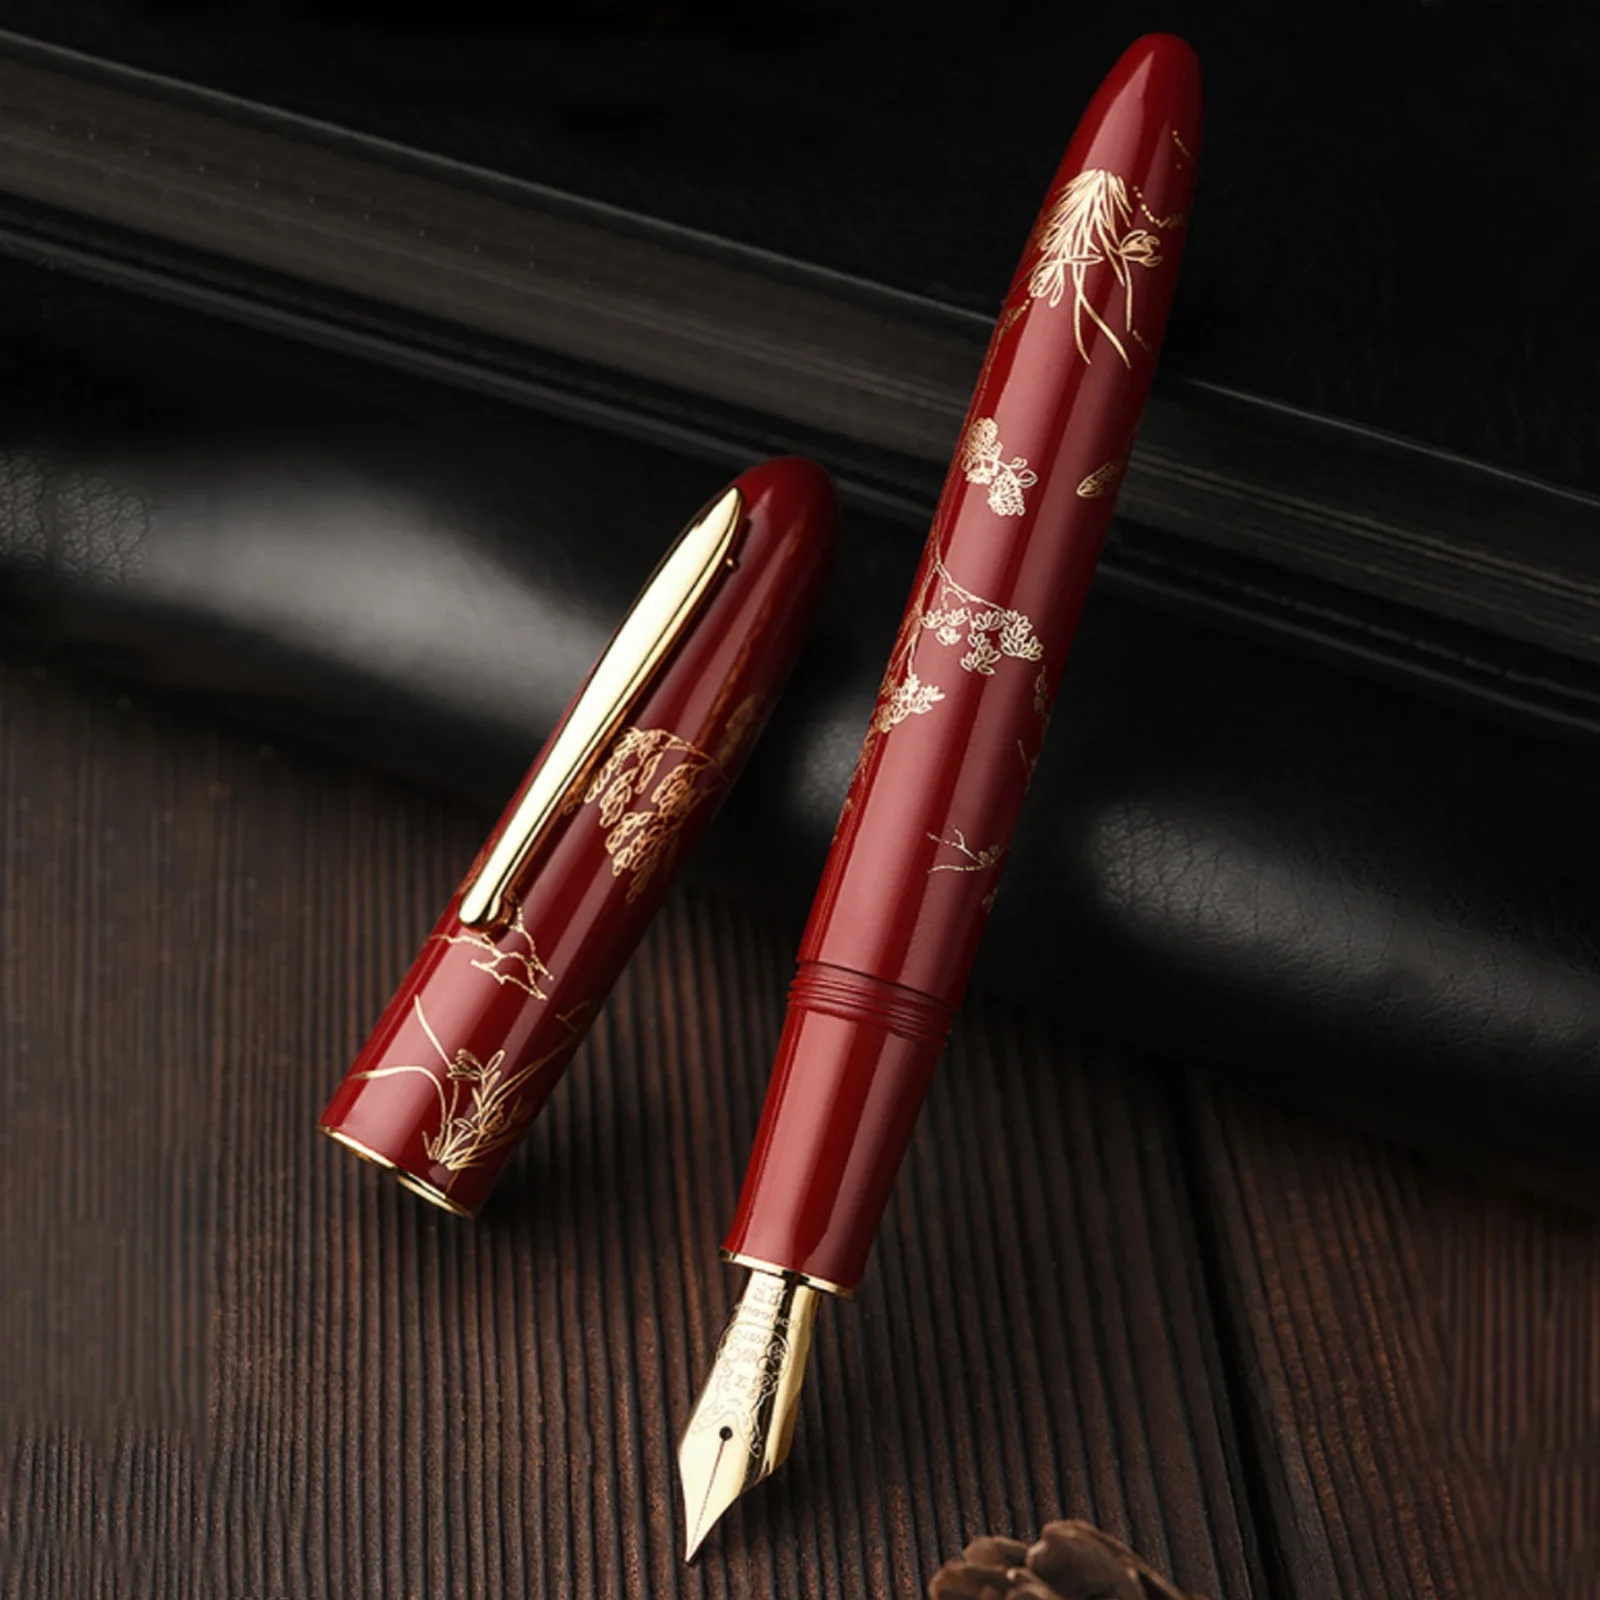 New Hongdian N23 Fountain Pen Rabbit Year Limited High-End Students Business Office supplies Gold Carving writing gifts pens